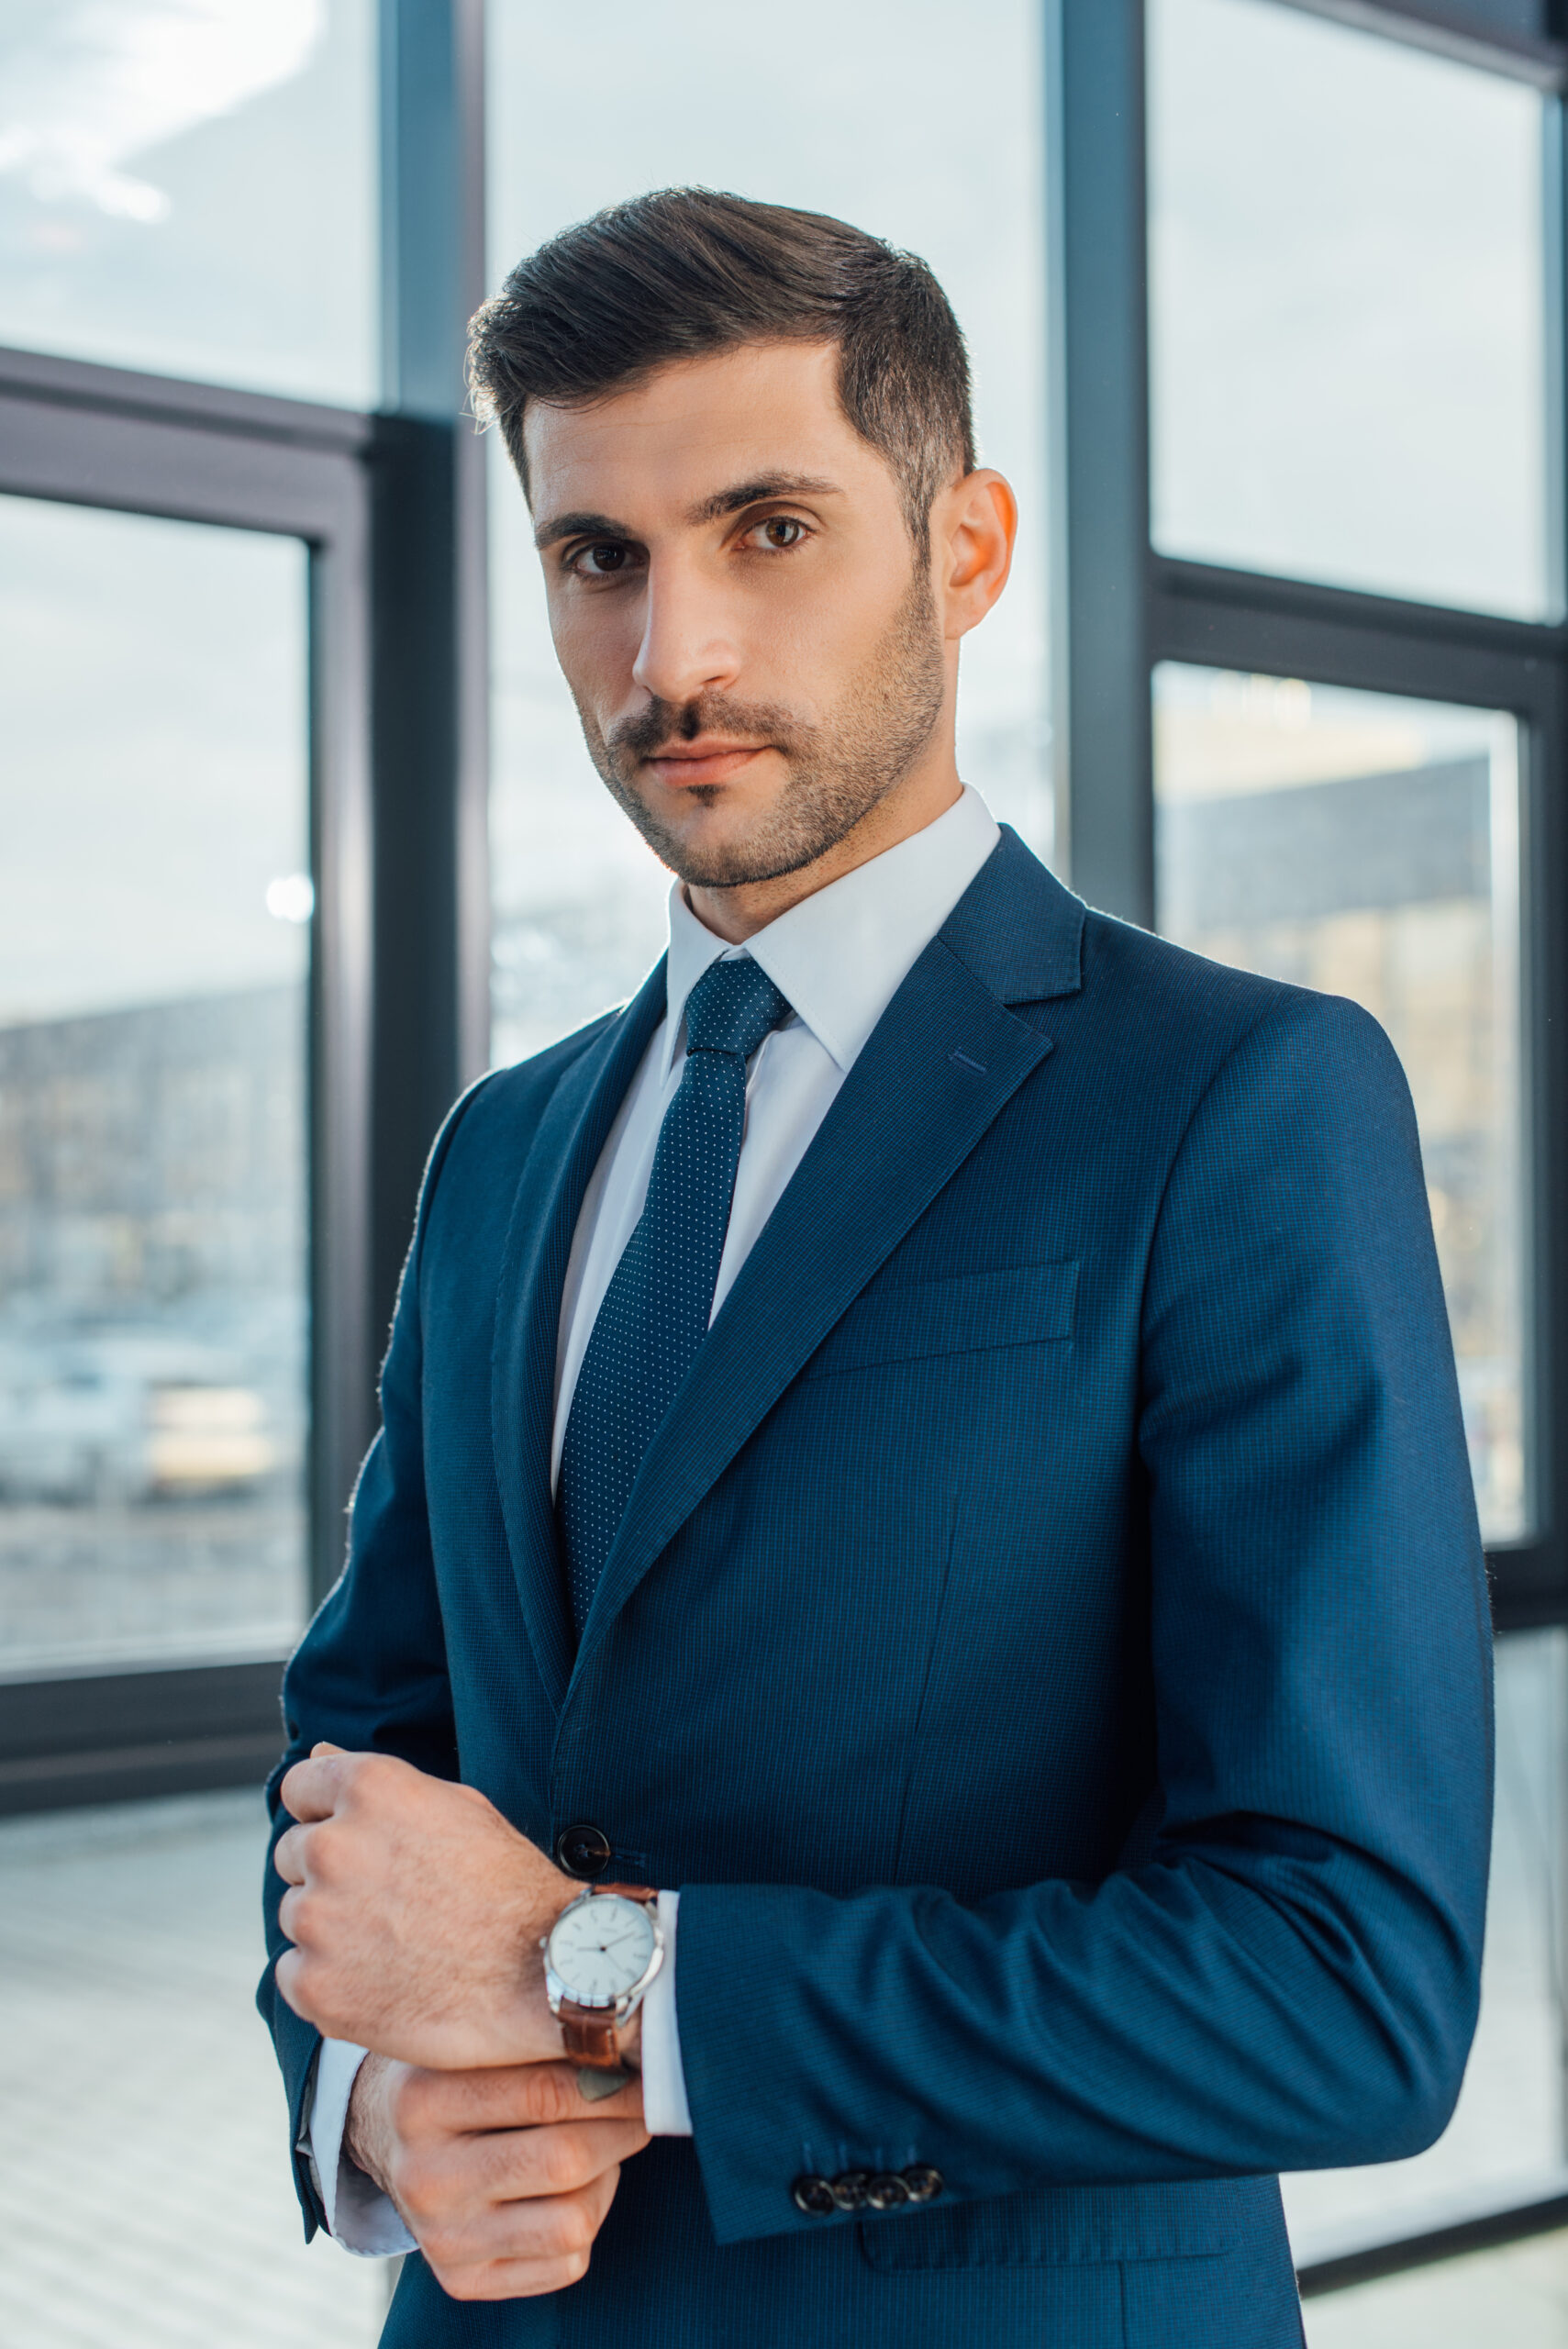 handsome professional businessman in suit posing in modern office